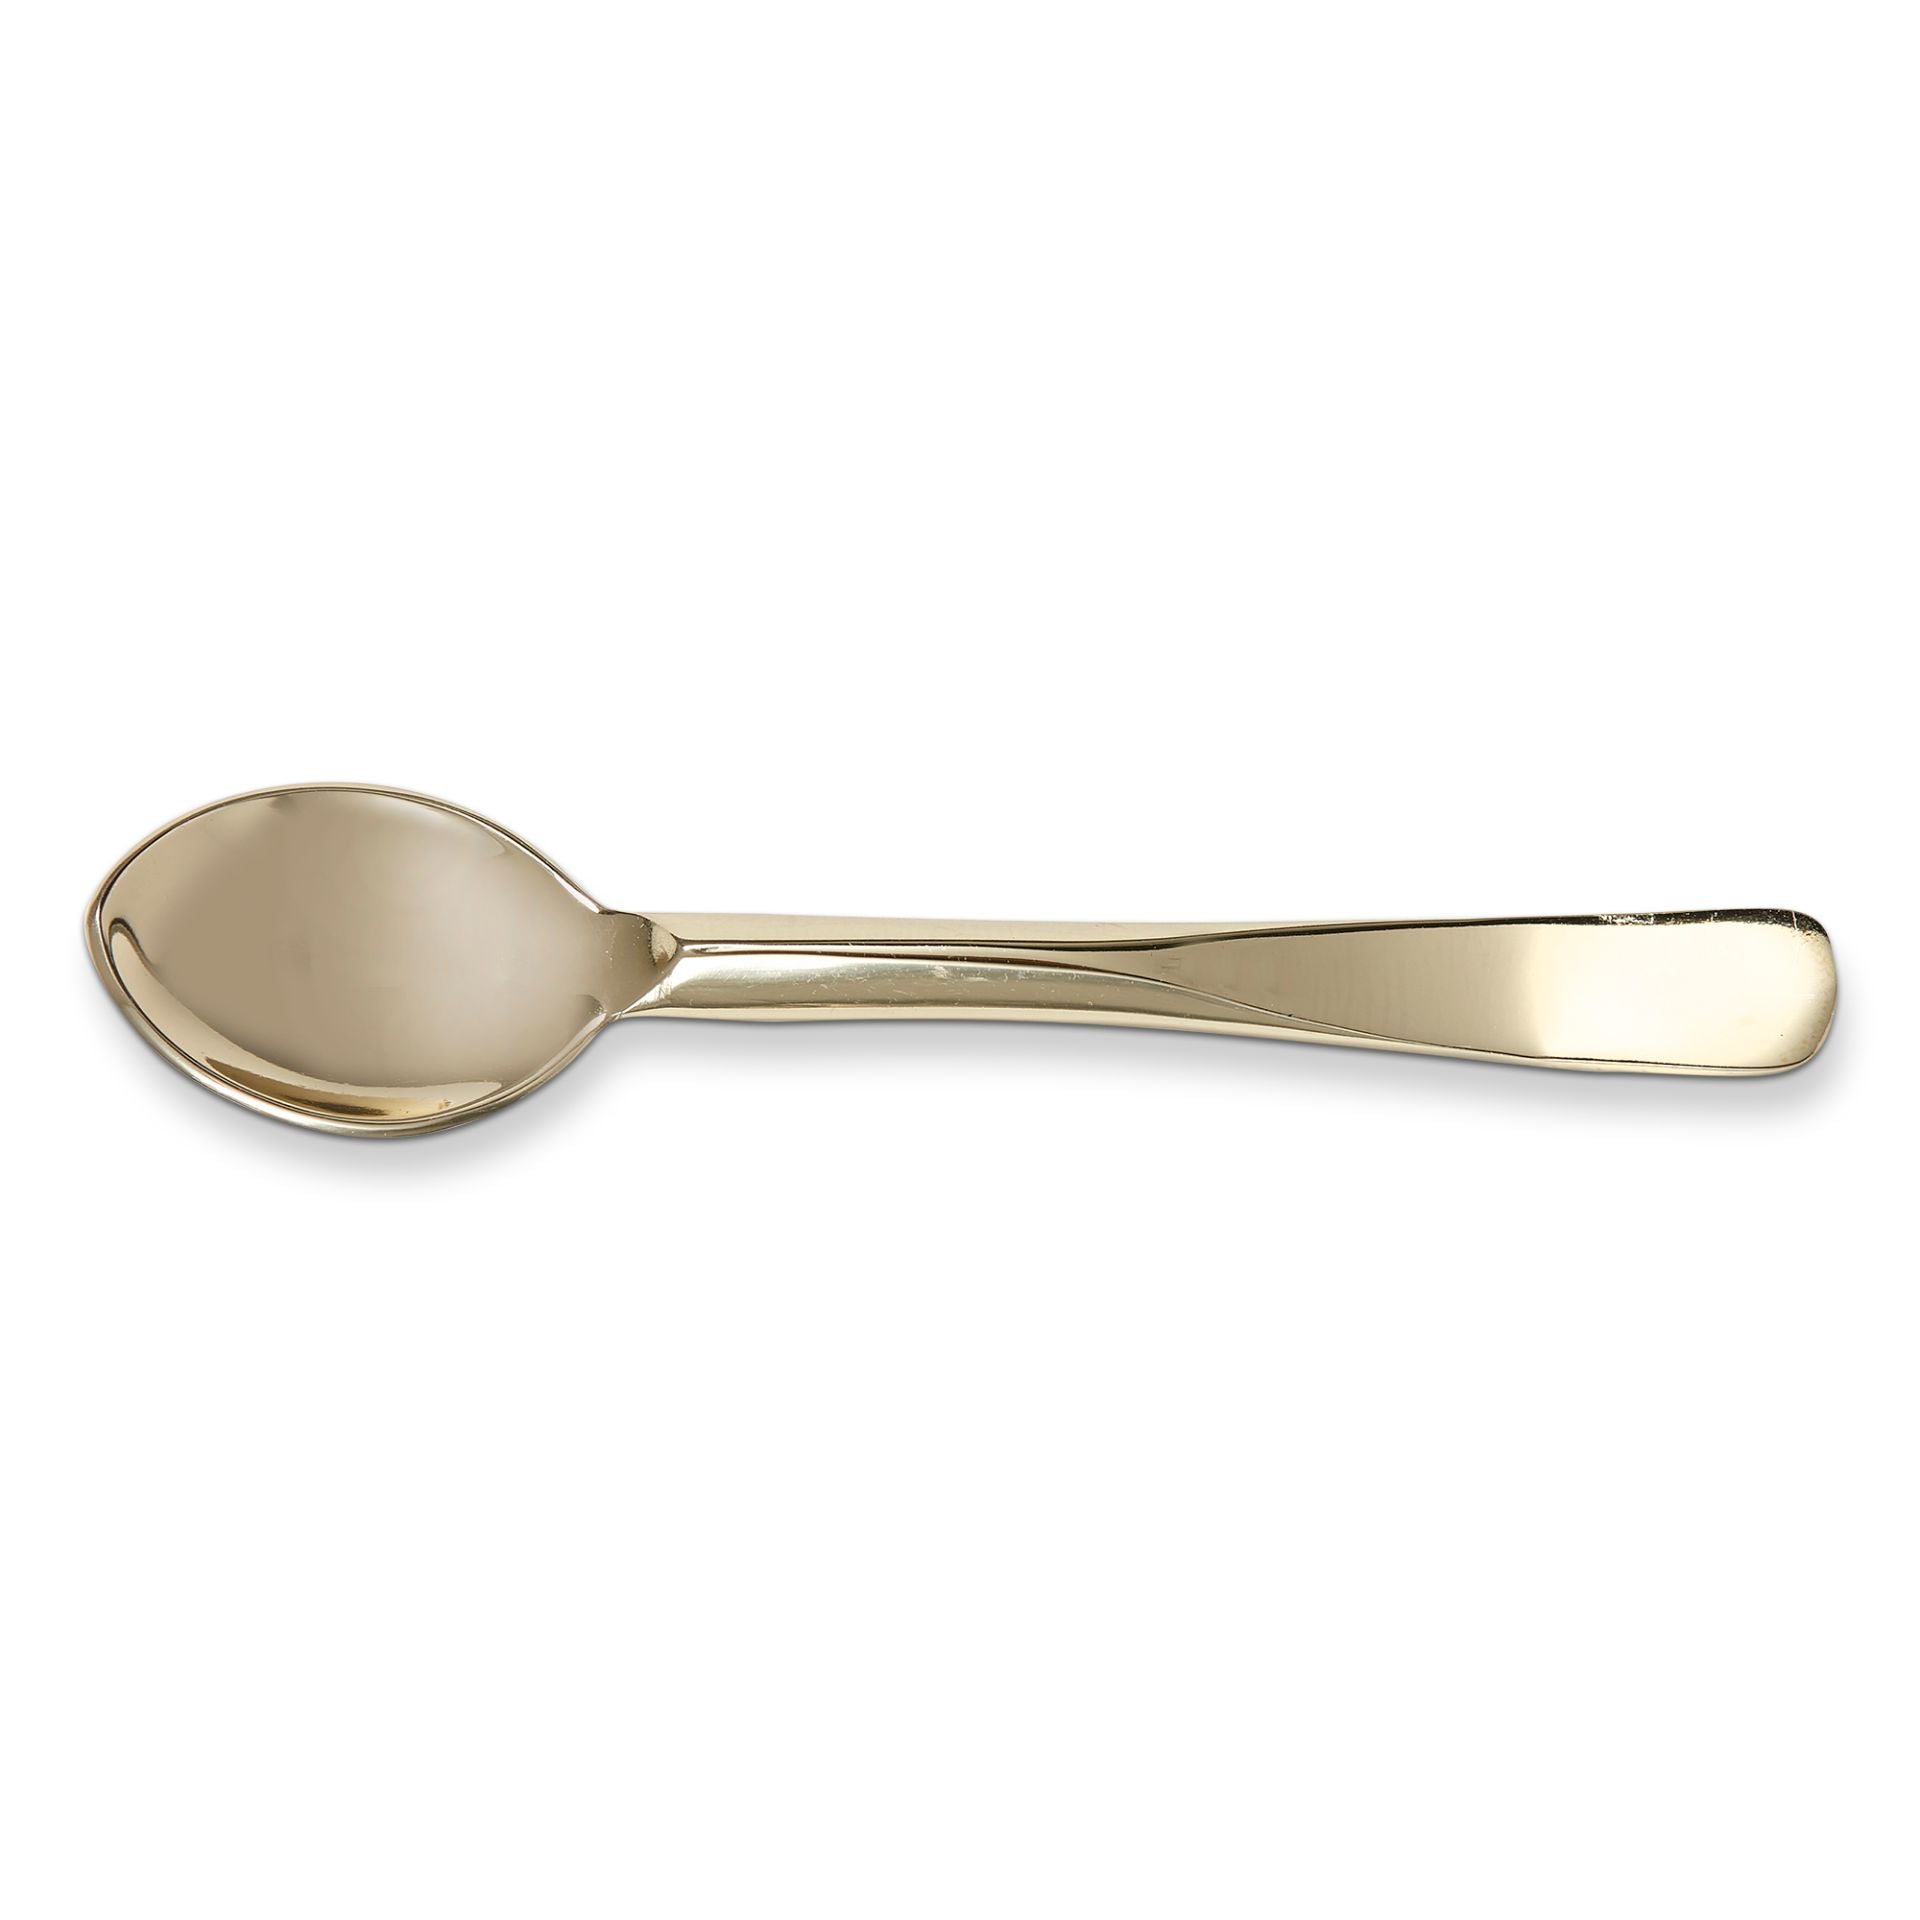 Tag Gold Appetizer Spoon G17155